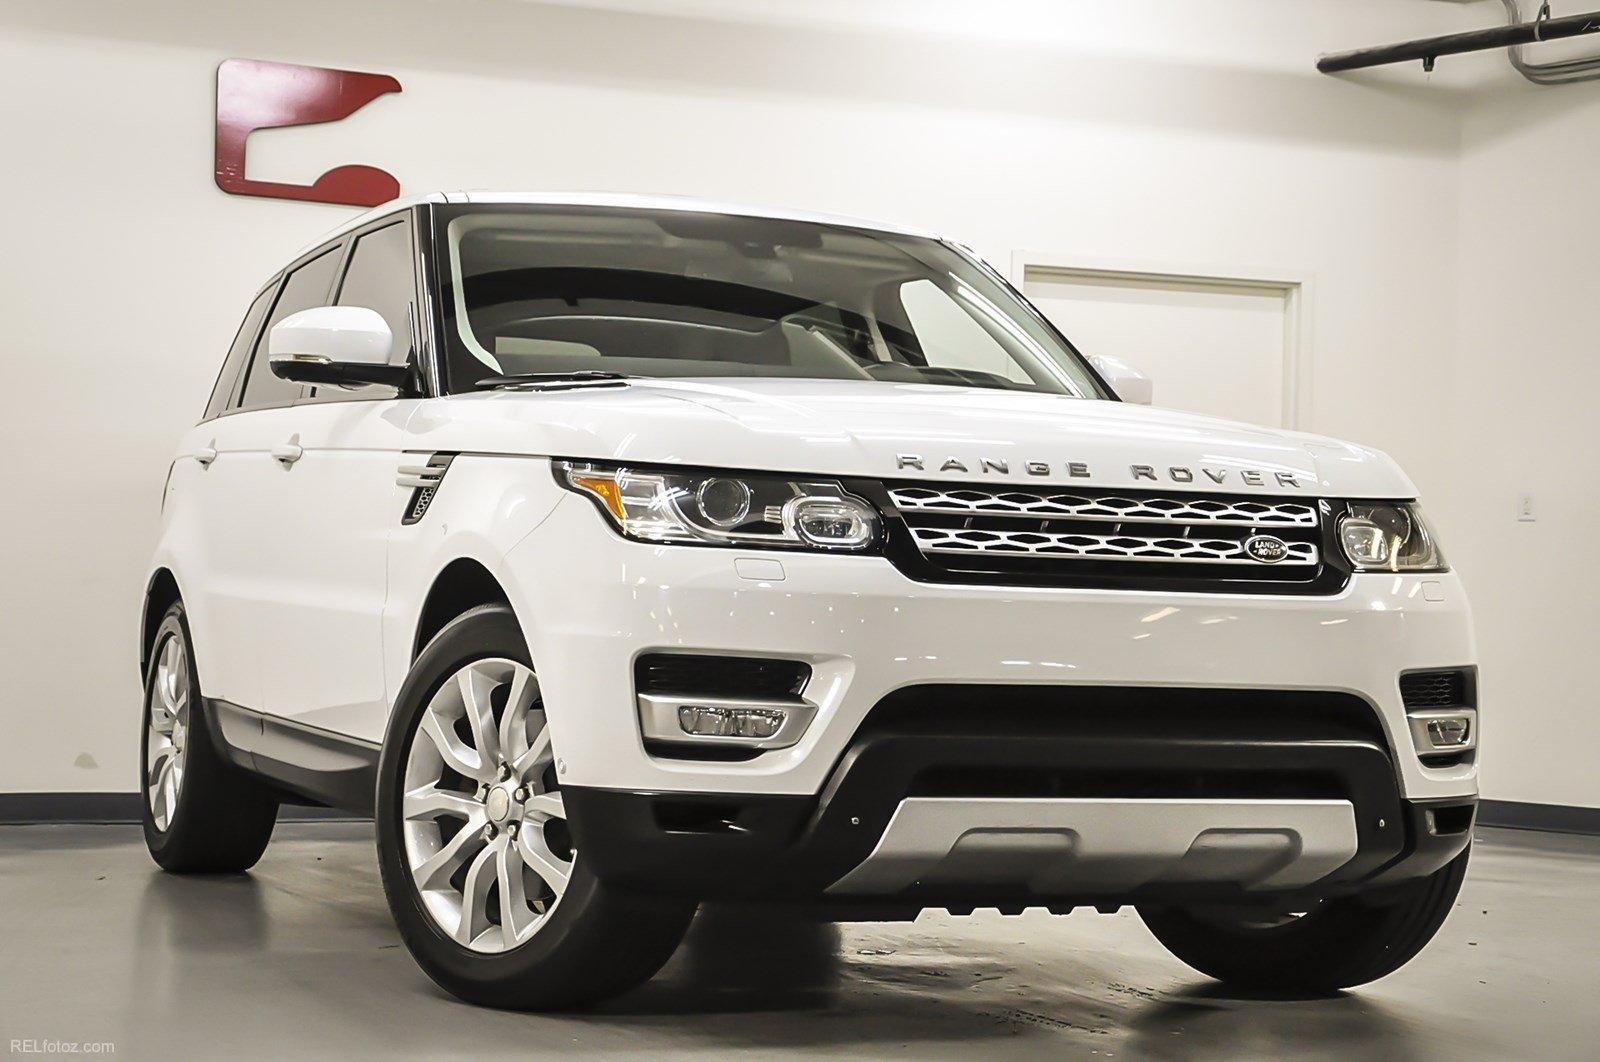 Used 2014 Land Rover Range Rover Sport 3.0L V6 Supercharged HSE for sale Sold at Gravity Autos Marietta in Marietta GA 30060 2